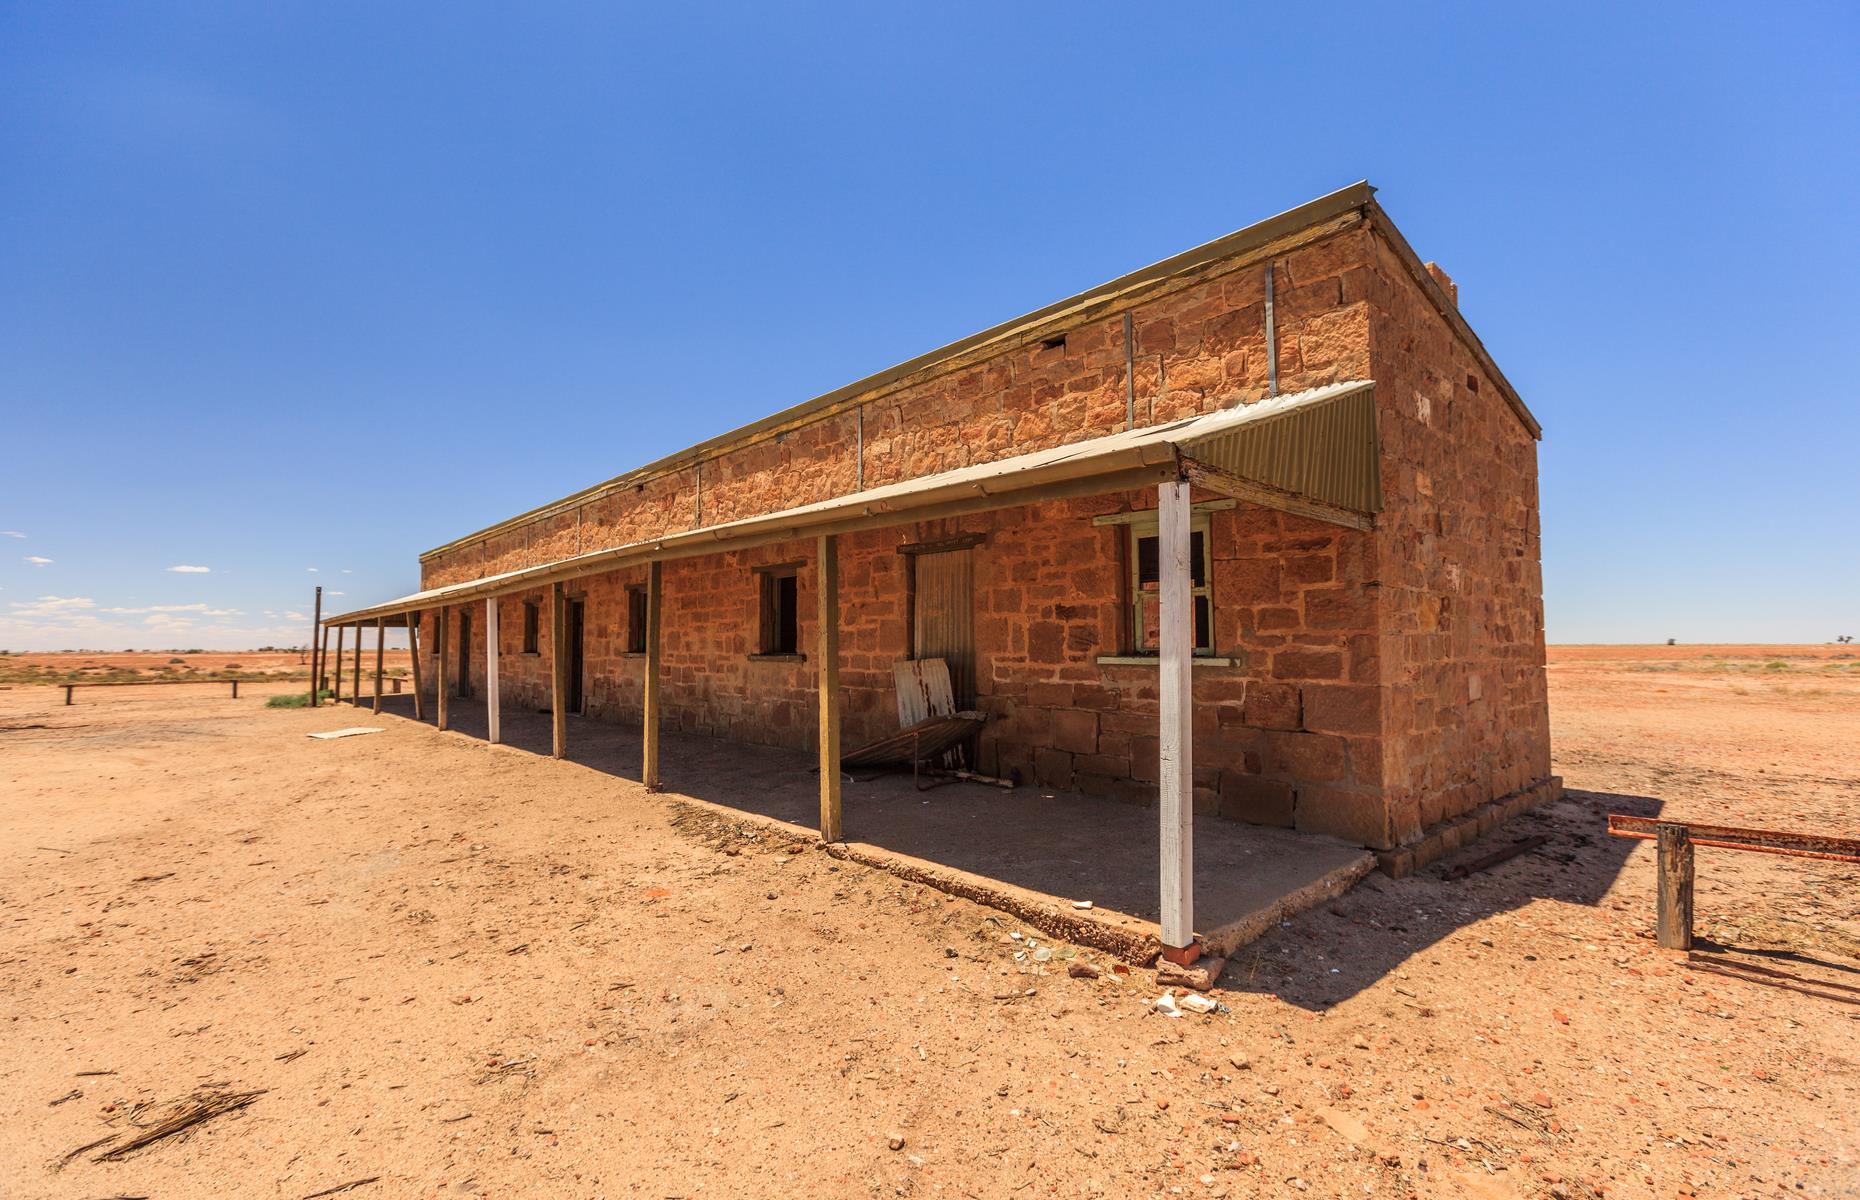 Australia’s outback is scattered with the dilapidated ruins of long-shuttered railway stations such as the Beresford Siding, to the south of William Creek in South Australia. The secluded station was once a refilling stop for the old Ghan train that ran along the Central Australia Railway line between Port Augusta and Alice Springs. It’s now once of many striking sights along legendary outback route, the Oodnadatta Track.